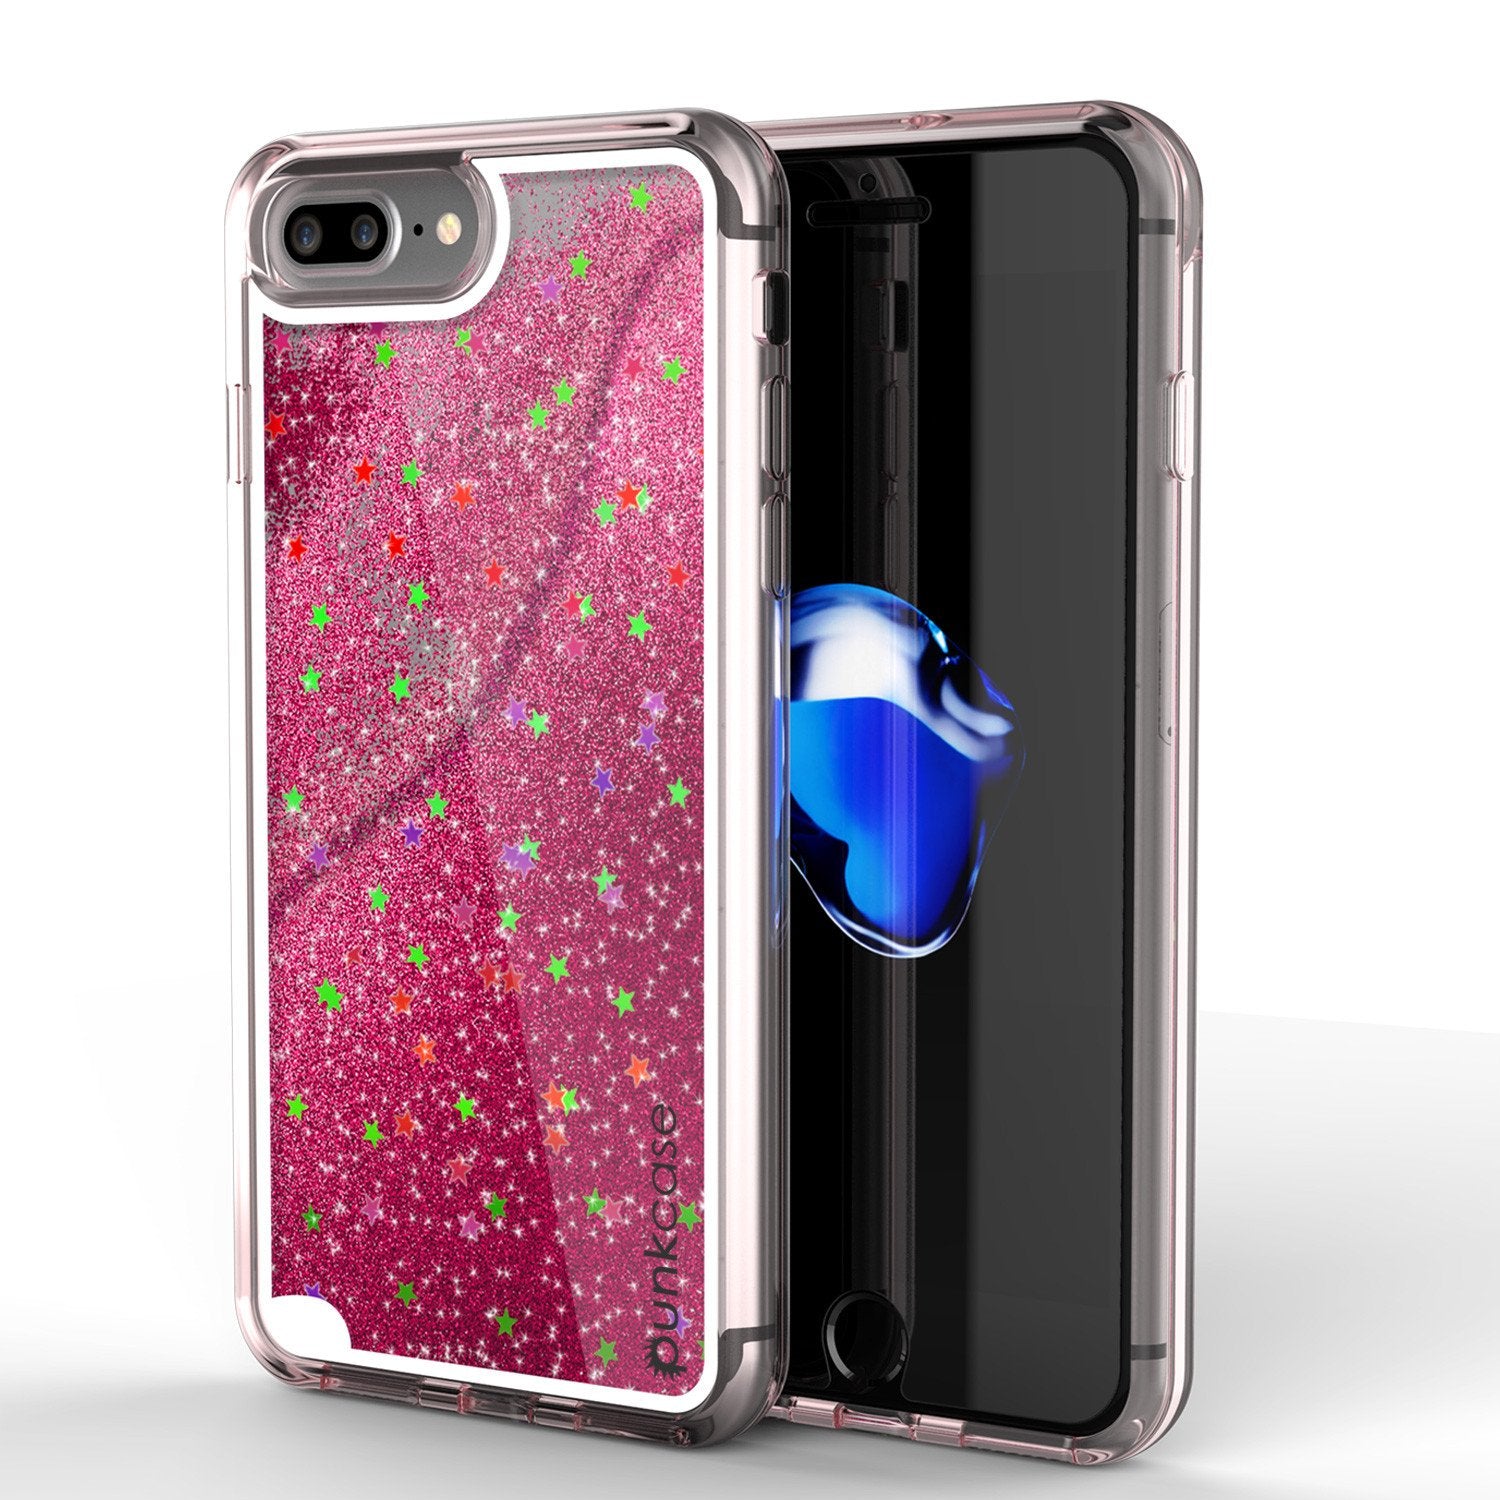 iPhone 7+Plus Case, PunkCase LIQUID Pink Series, Protective Dual Layer Floating Glitter Cover